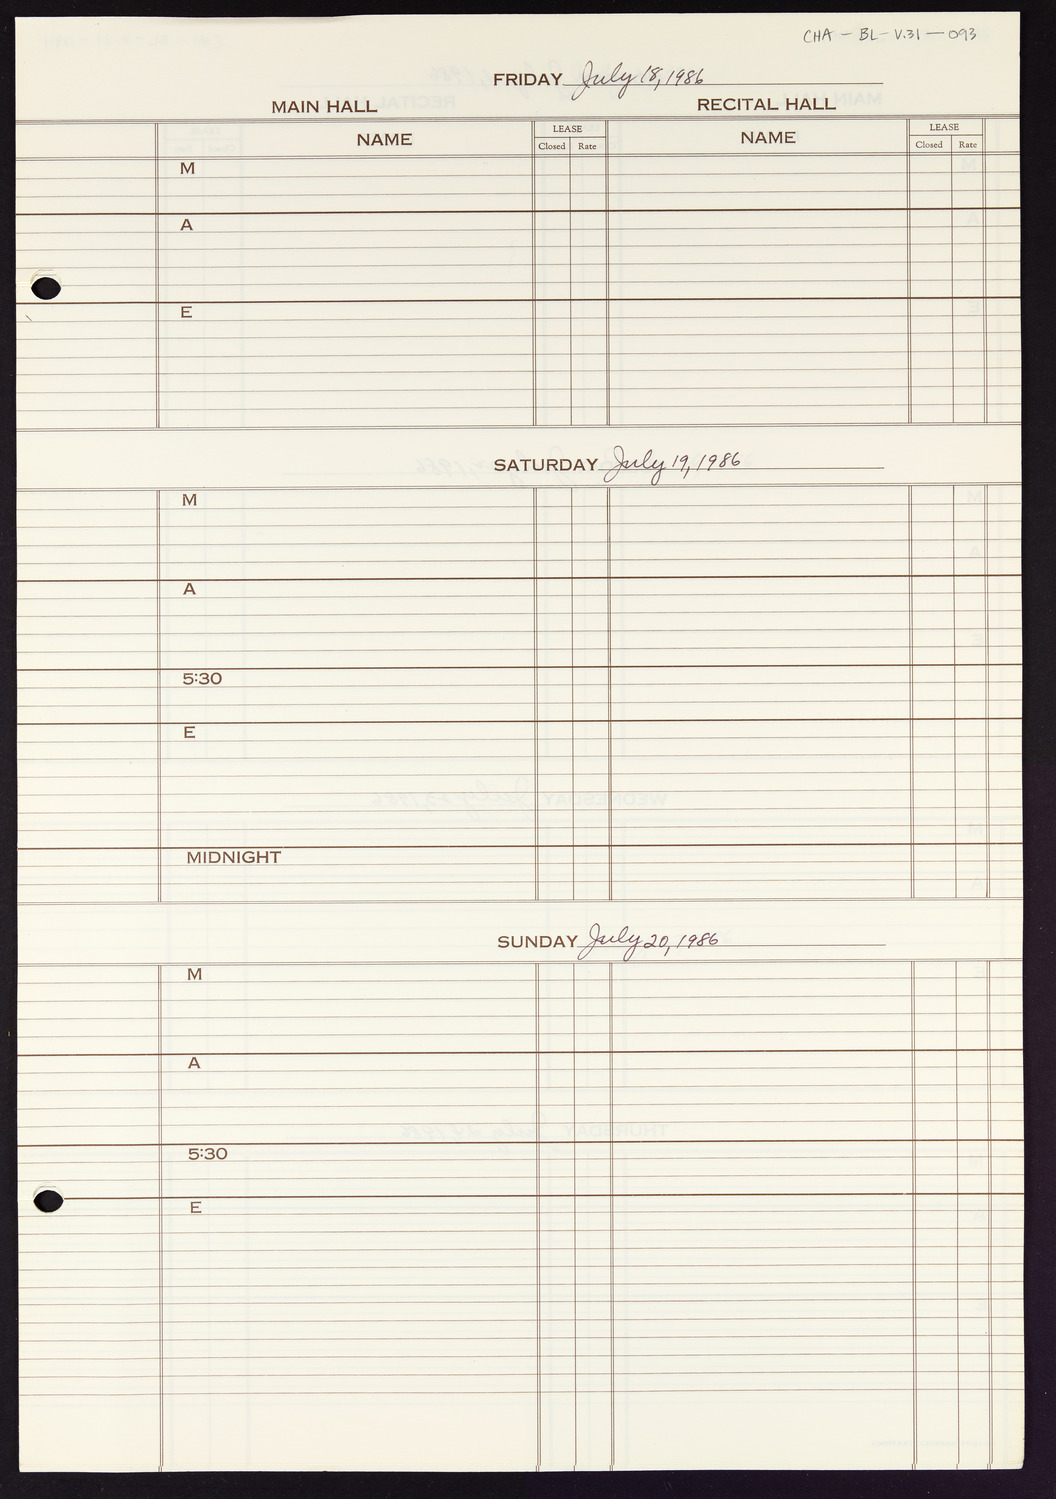 Carnegie Hall Booking Ledger, volume 31, page 93